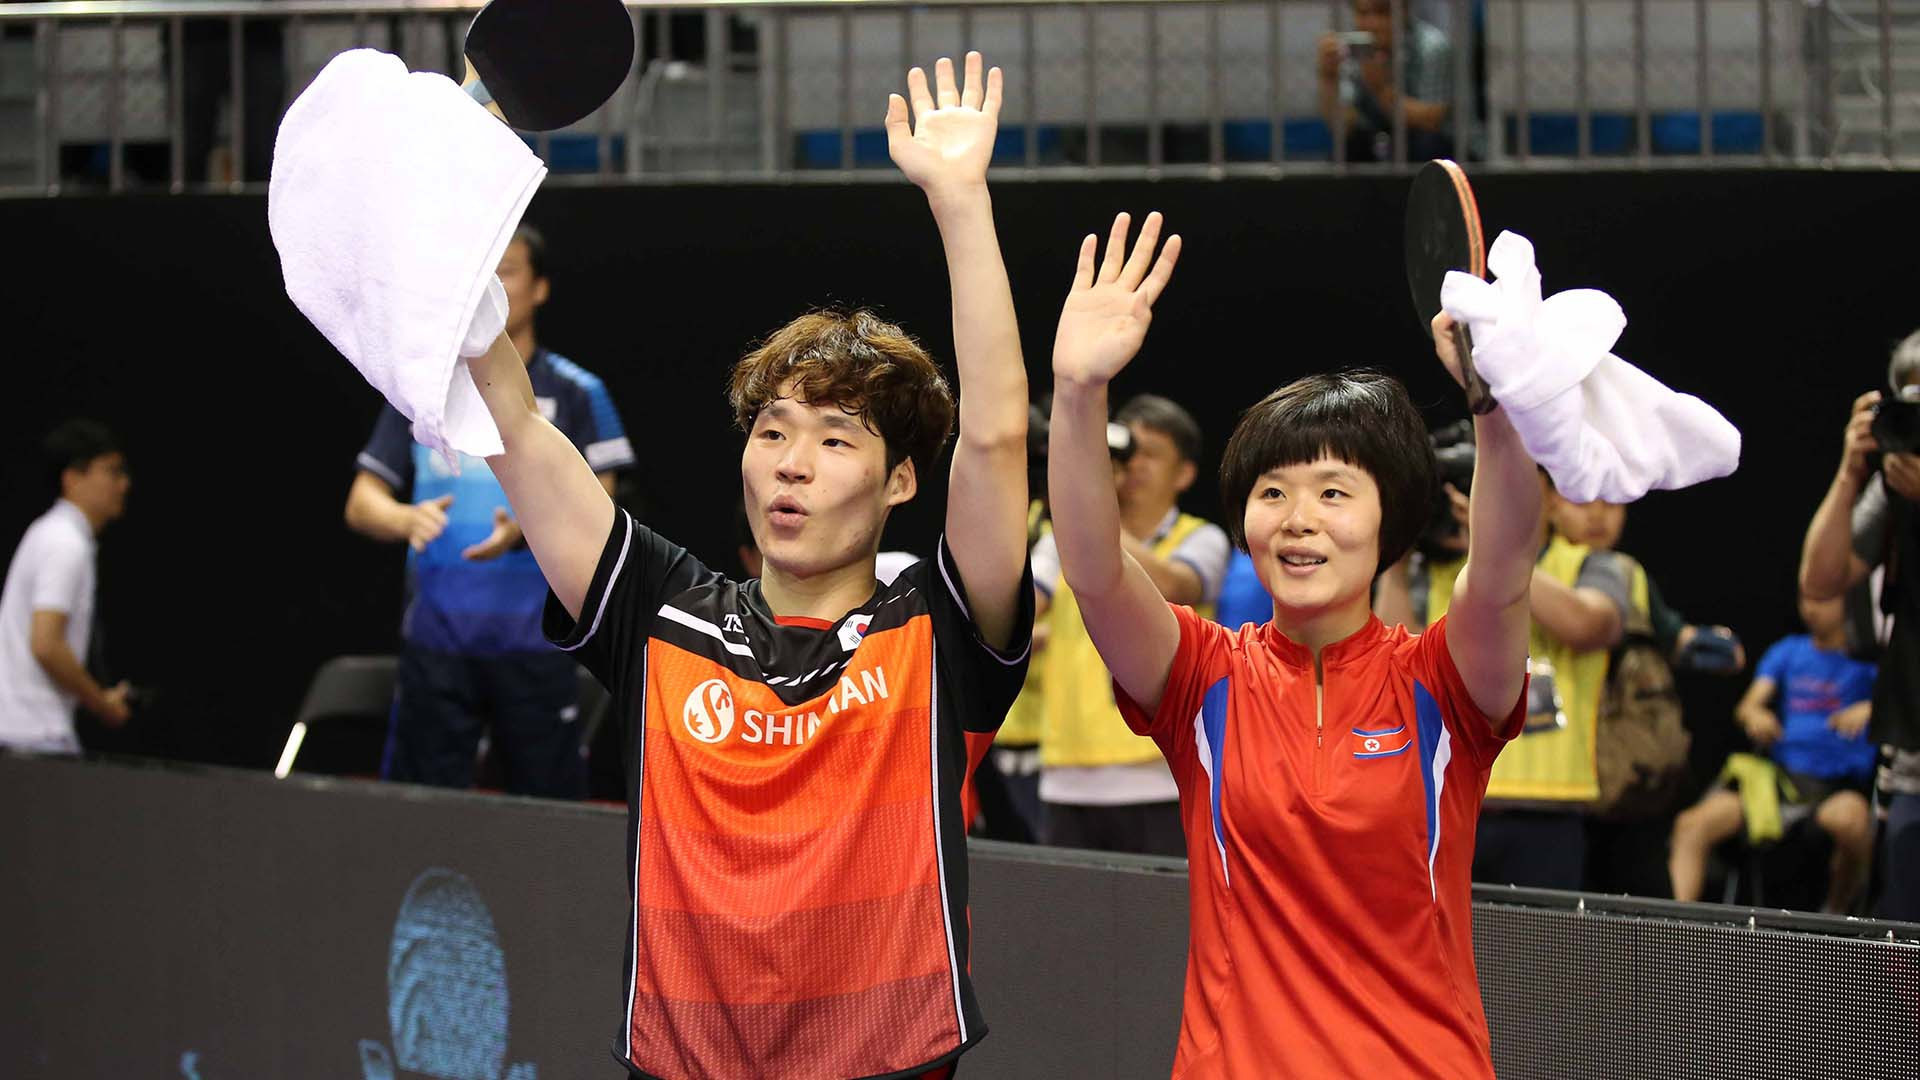 Jang Woojin and Cha Hyo Sim recently became the first joint Korean table tennis pair to win gold at an International Table Tennis Federation World Tour event, when they won the mixed doubles at the Korea Open ©ITTF